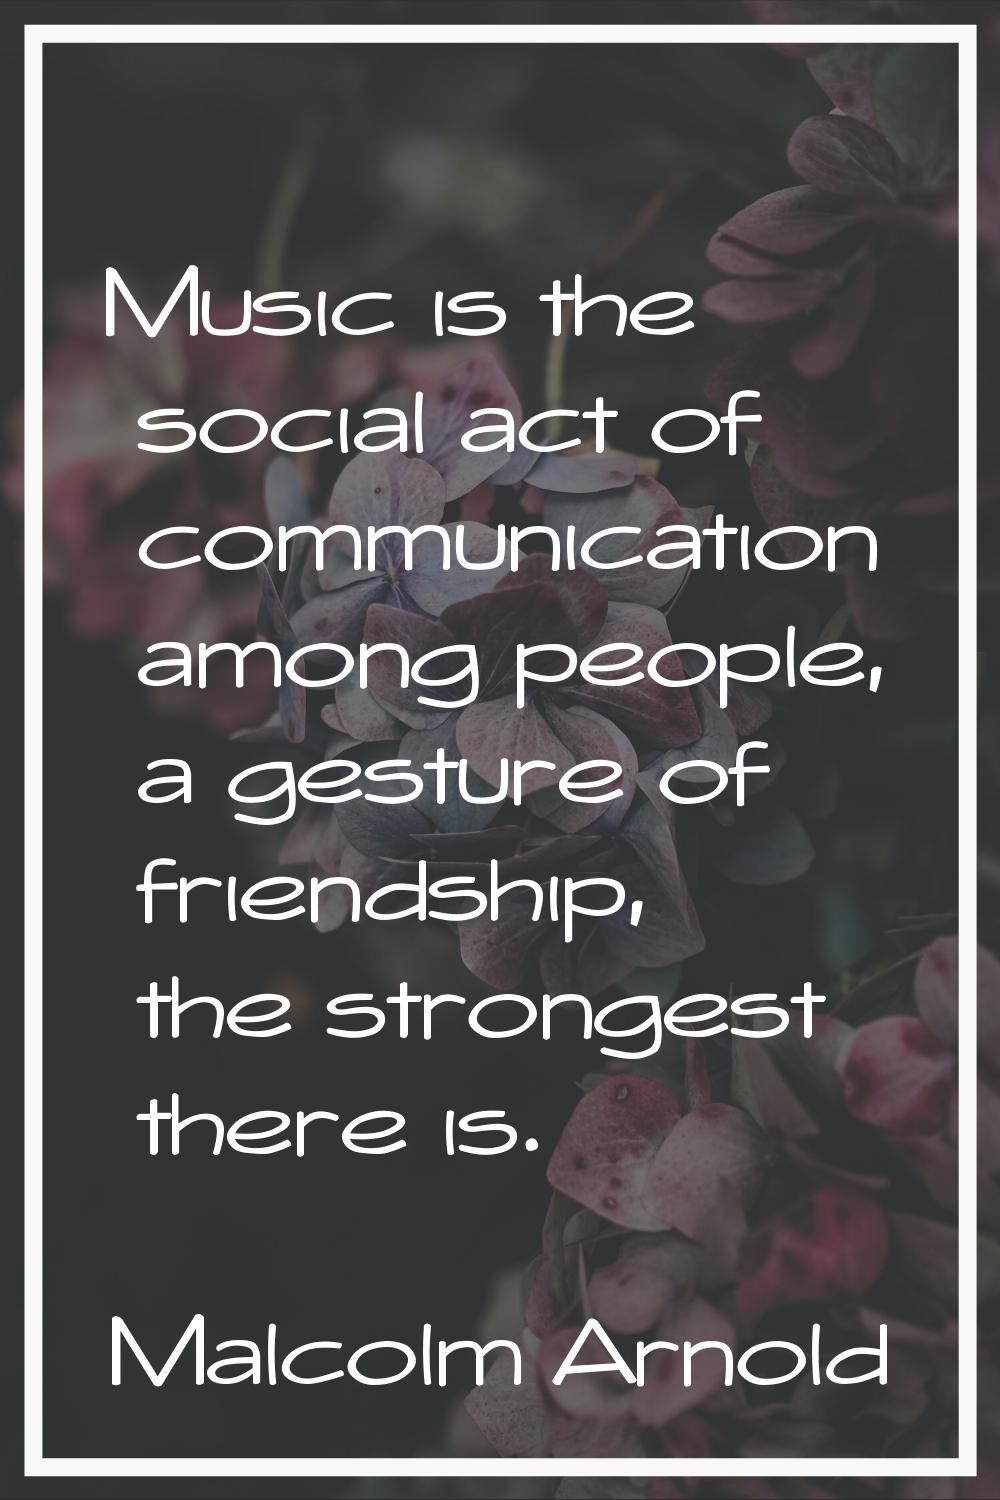 Music is the social act of communication among people, a gesture of friendship, the strongest there